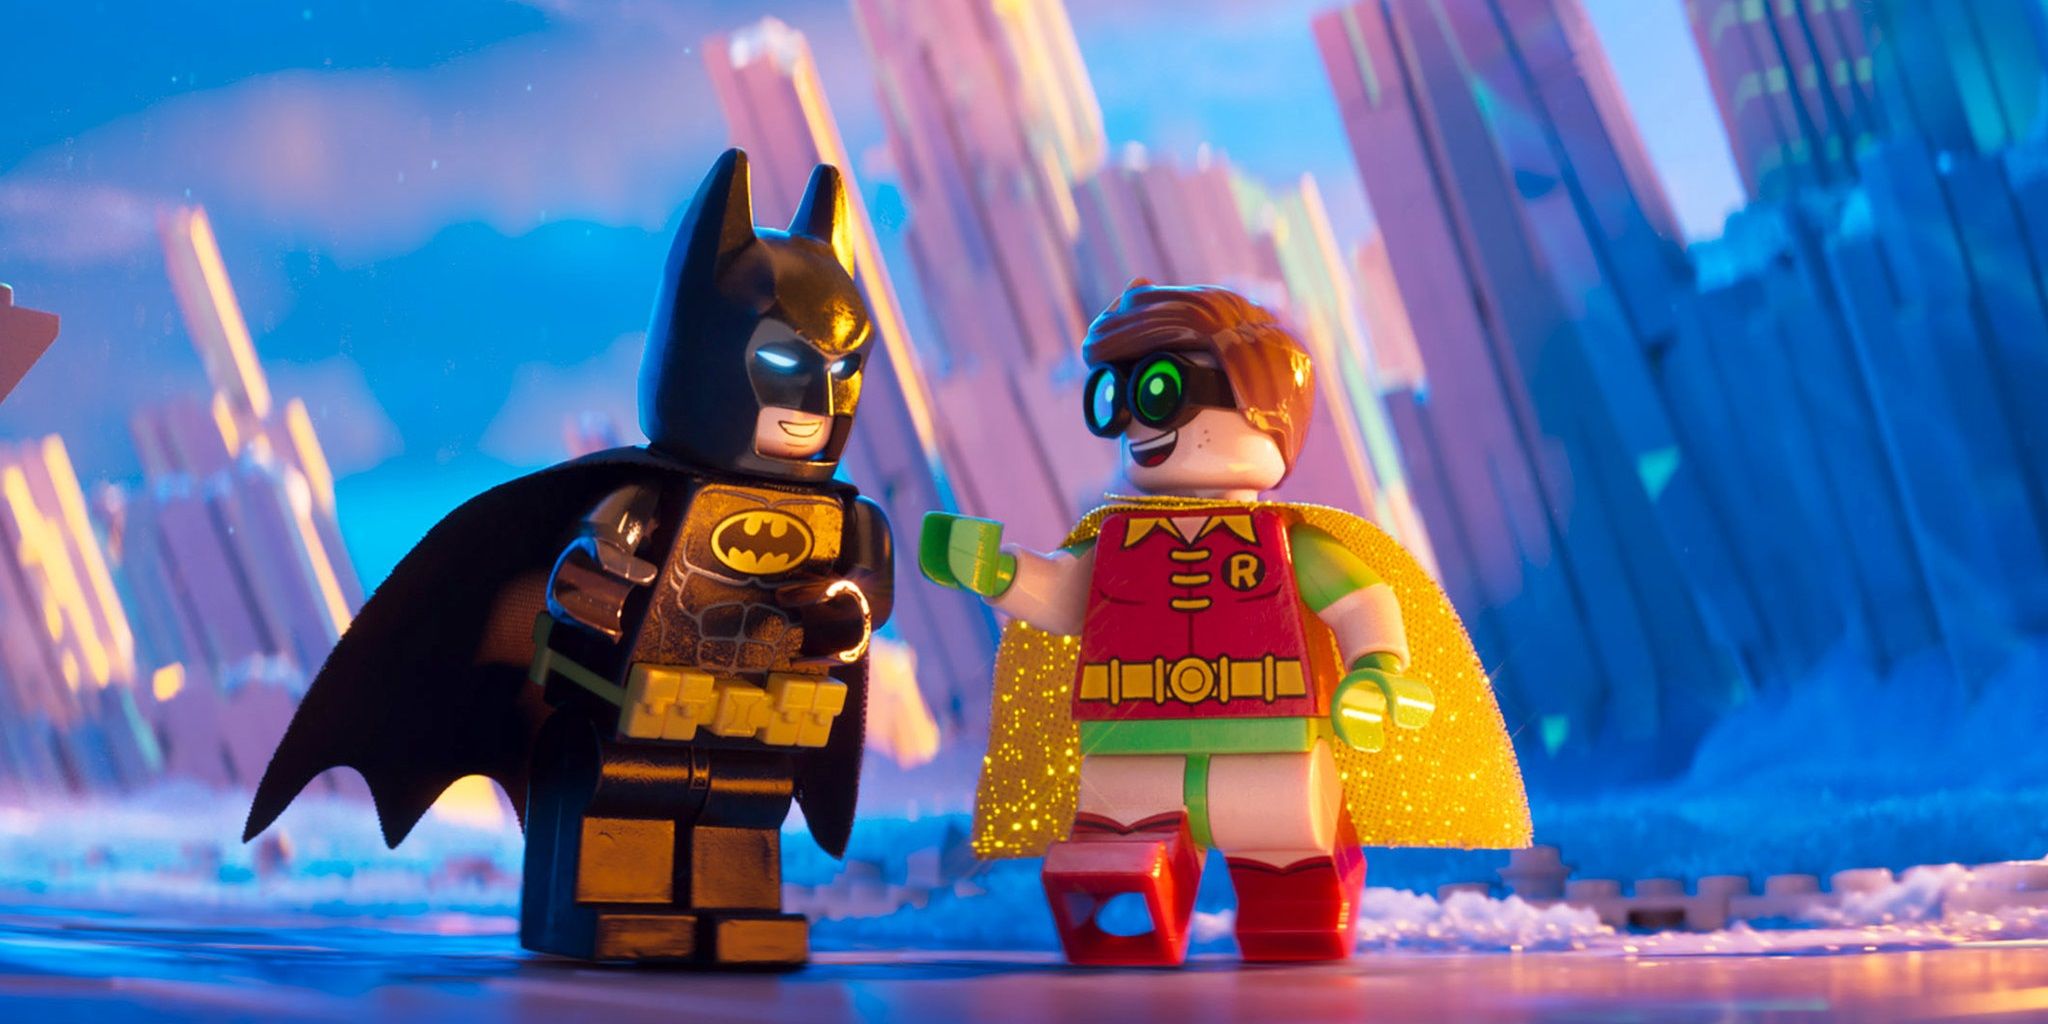 Batman and Robin at the Fortress of Solitude in The Lego Batman Movie